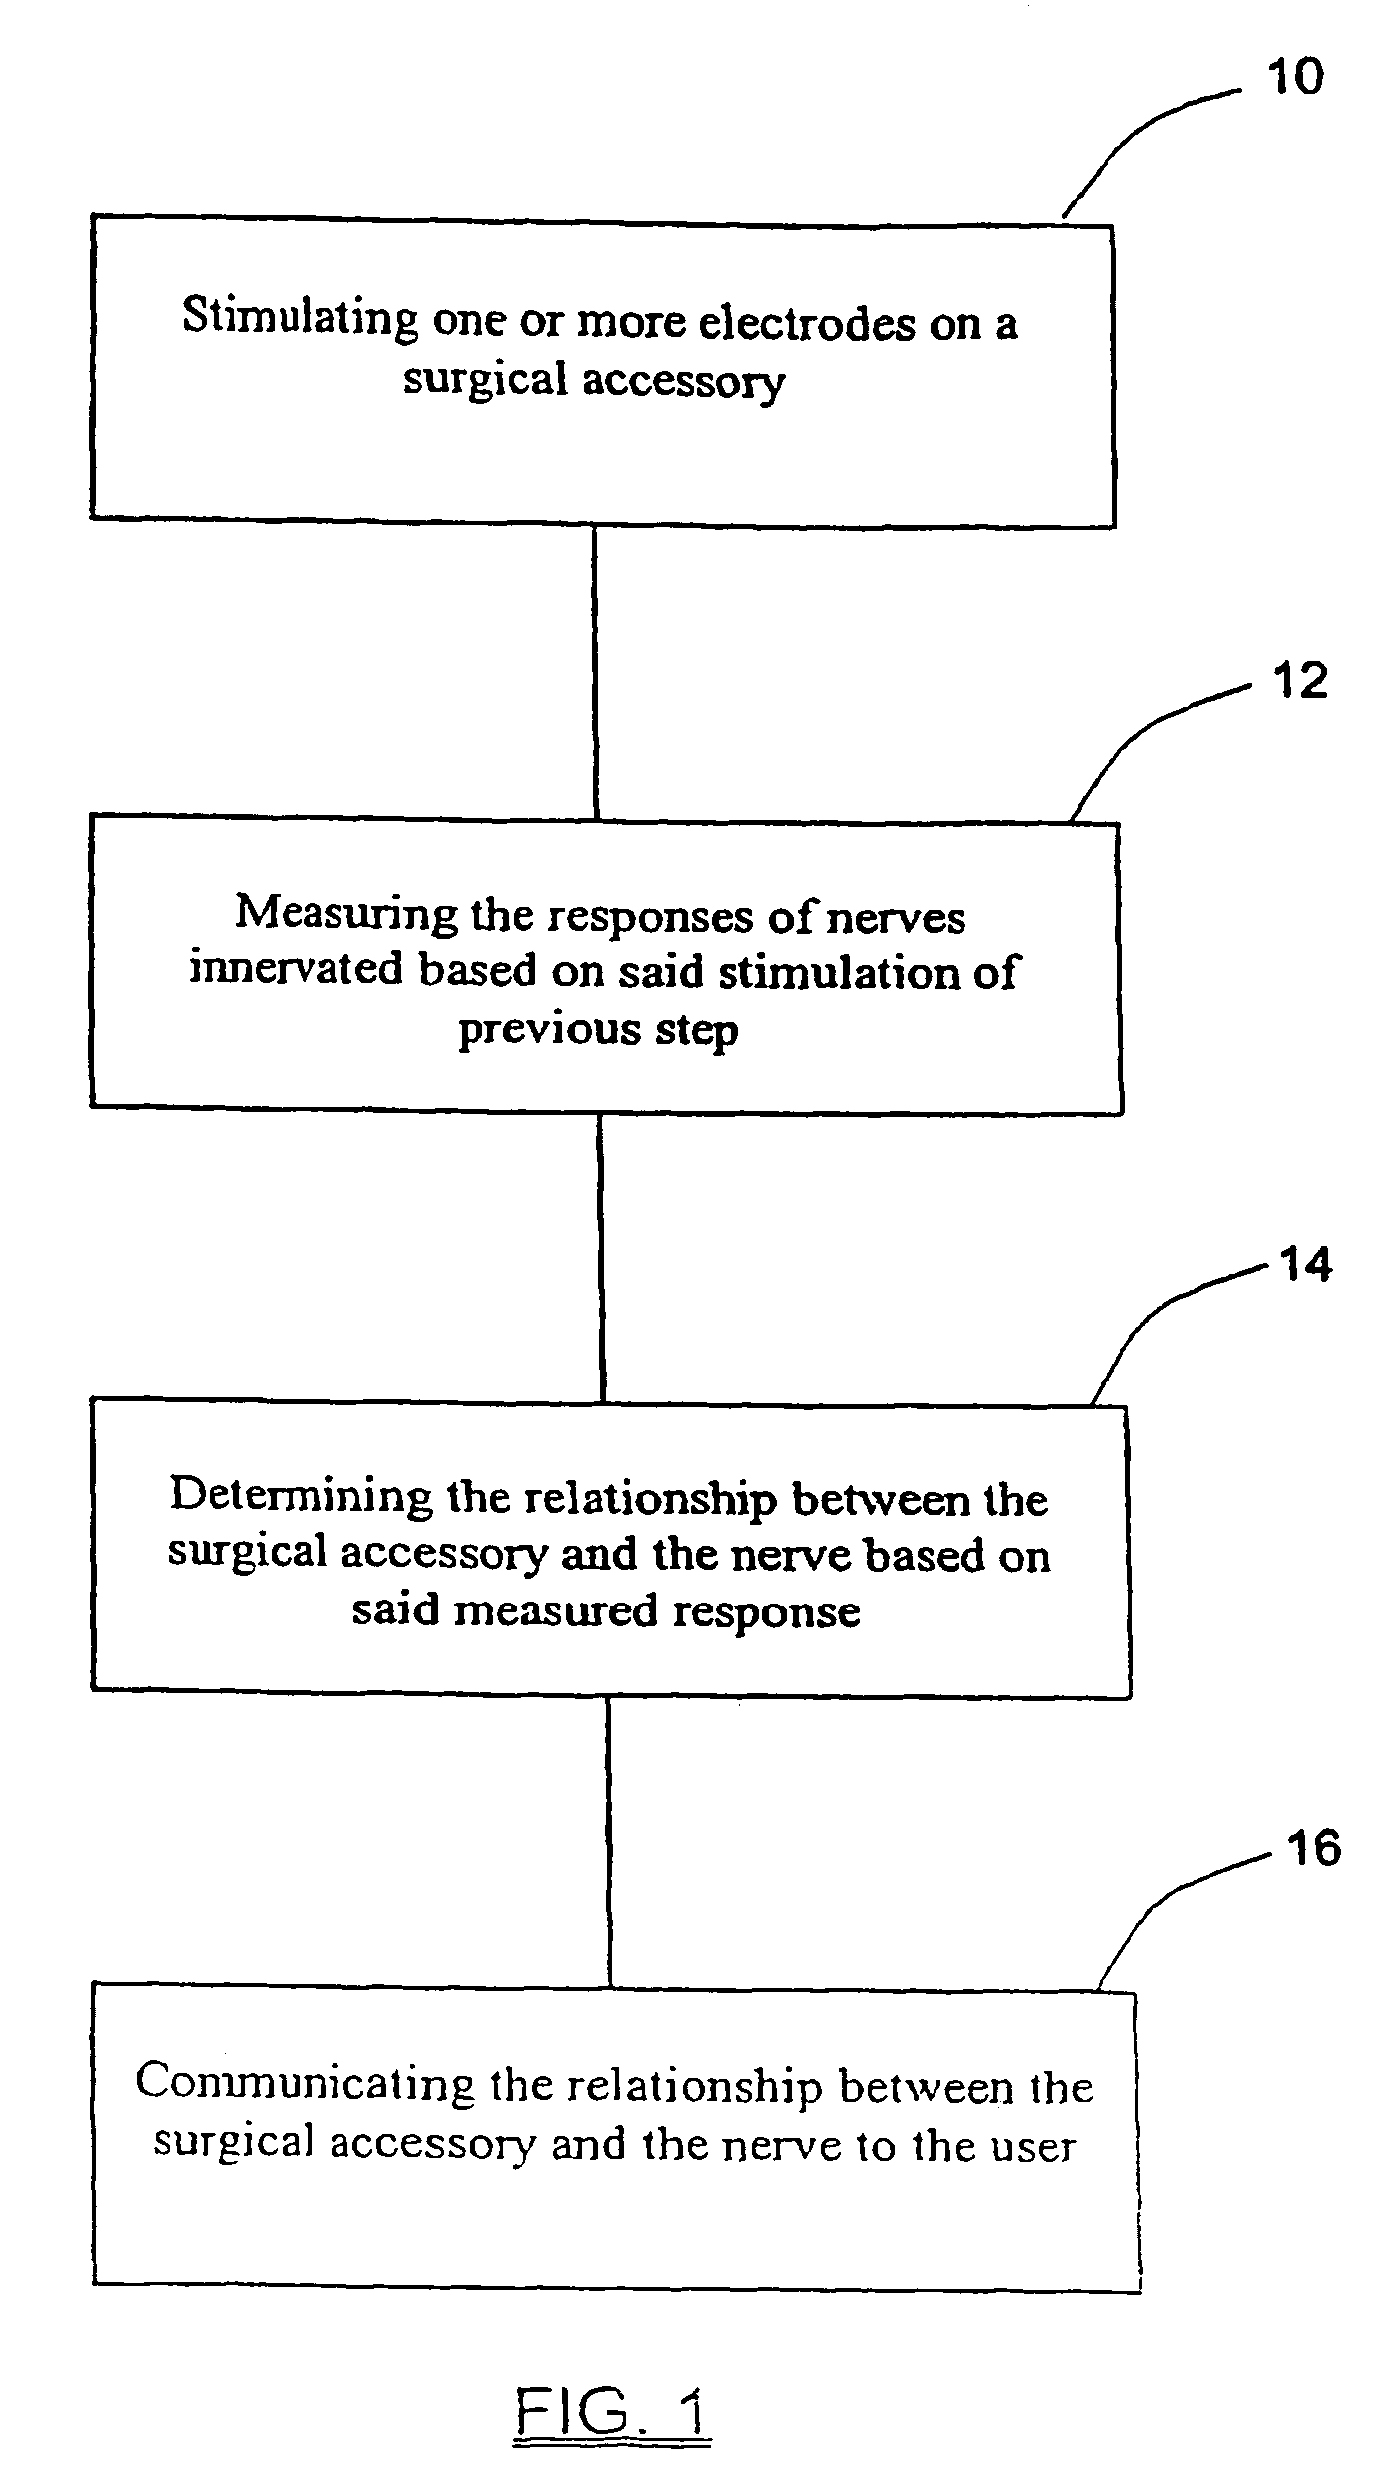 System and methods for performing surgical procedures and assessments